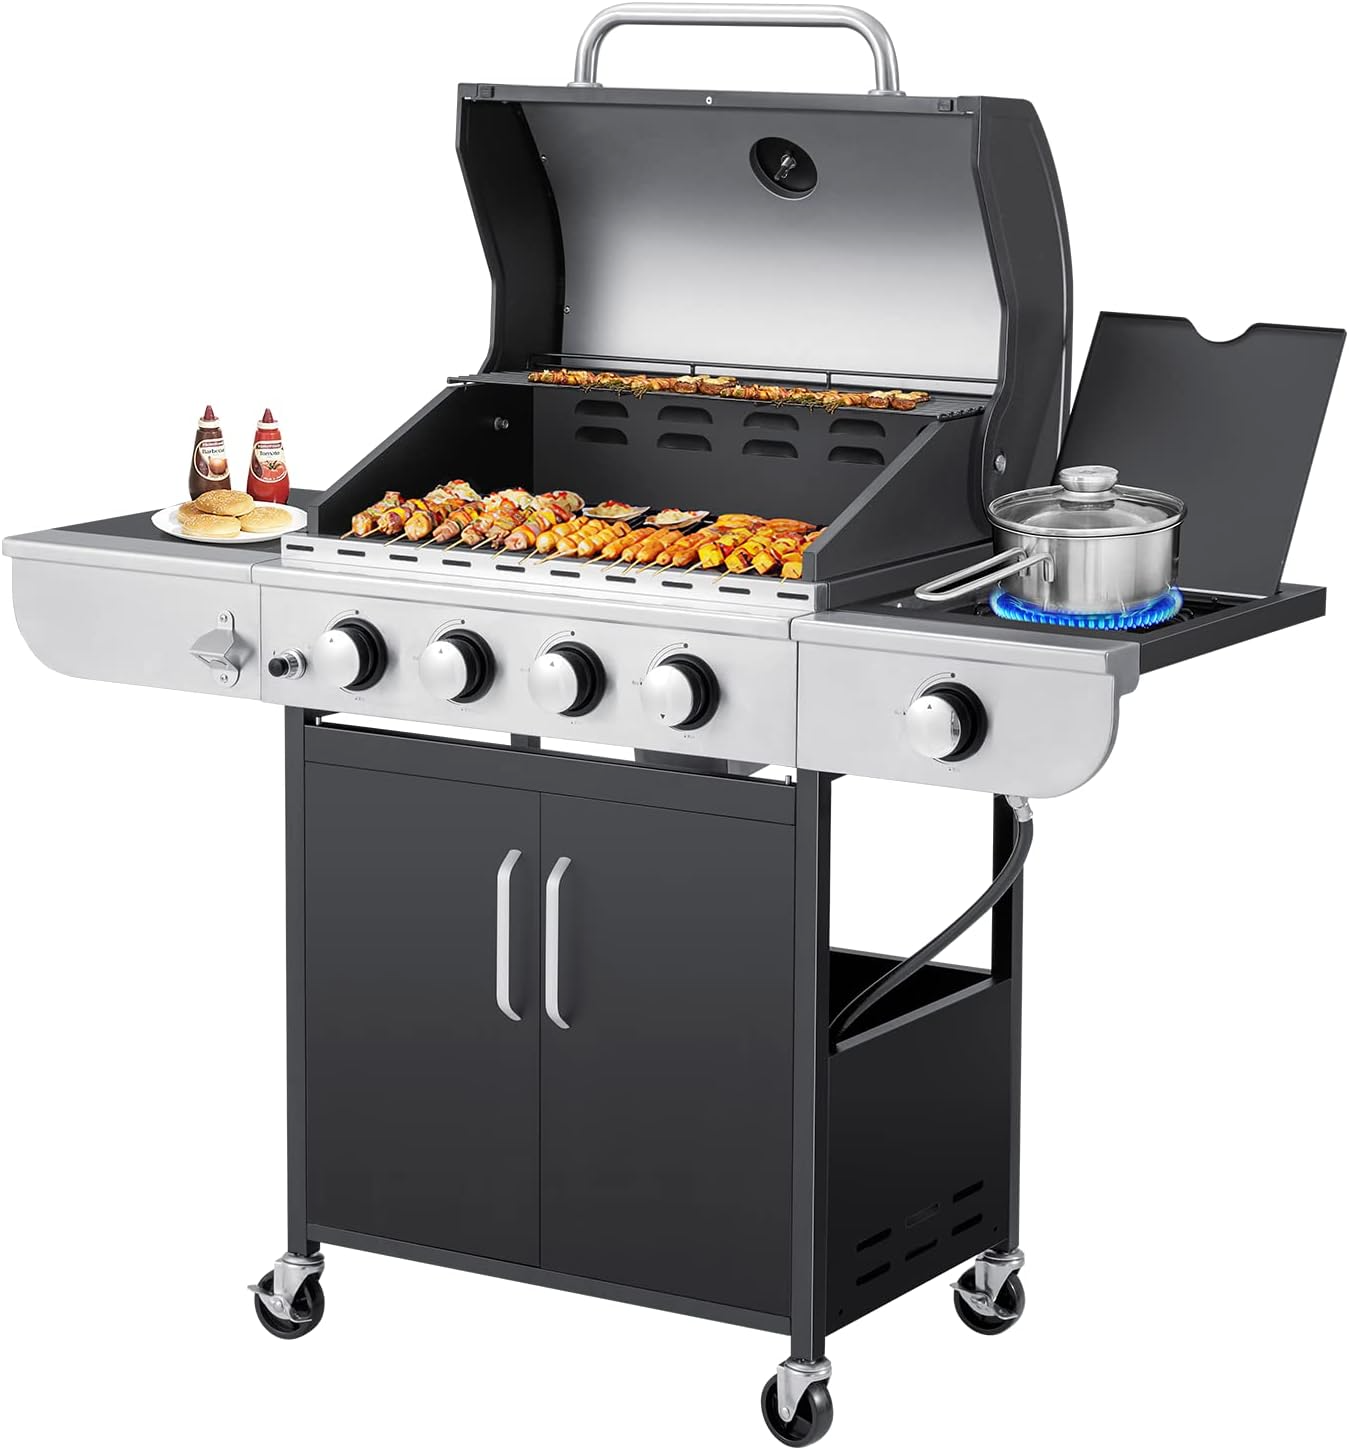 MELLCOM 4 Burner BBQ Propane Gas Grill, 42,000 BTU Stainless Steel Patio Garden Barbecue Grill with Stove and Side Table - Barbecue Whizz...Watch My Smoke!